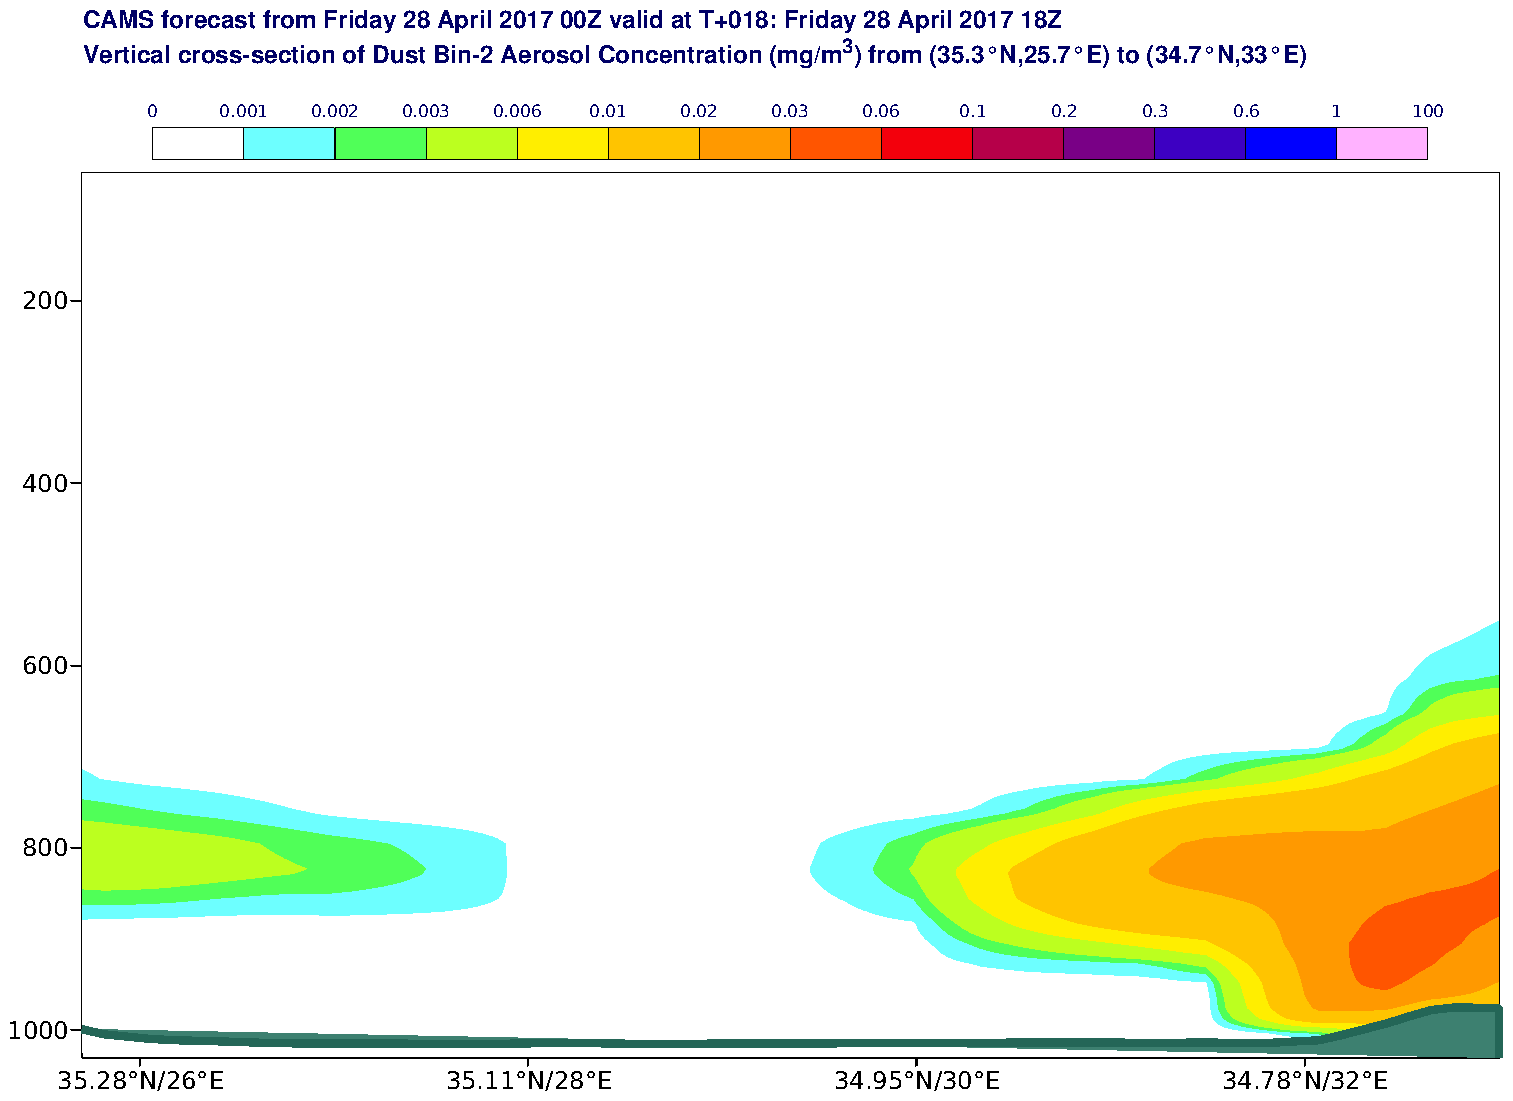 Vertical cross-section of Dust Bin-2 Aerosol Concentration (mg/m3) valid at T18 - 2017-04-28 18:00